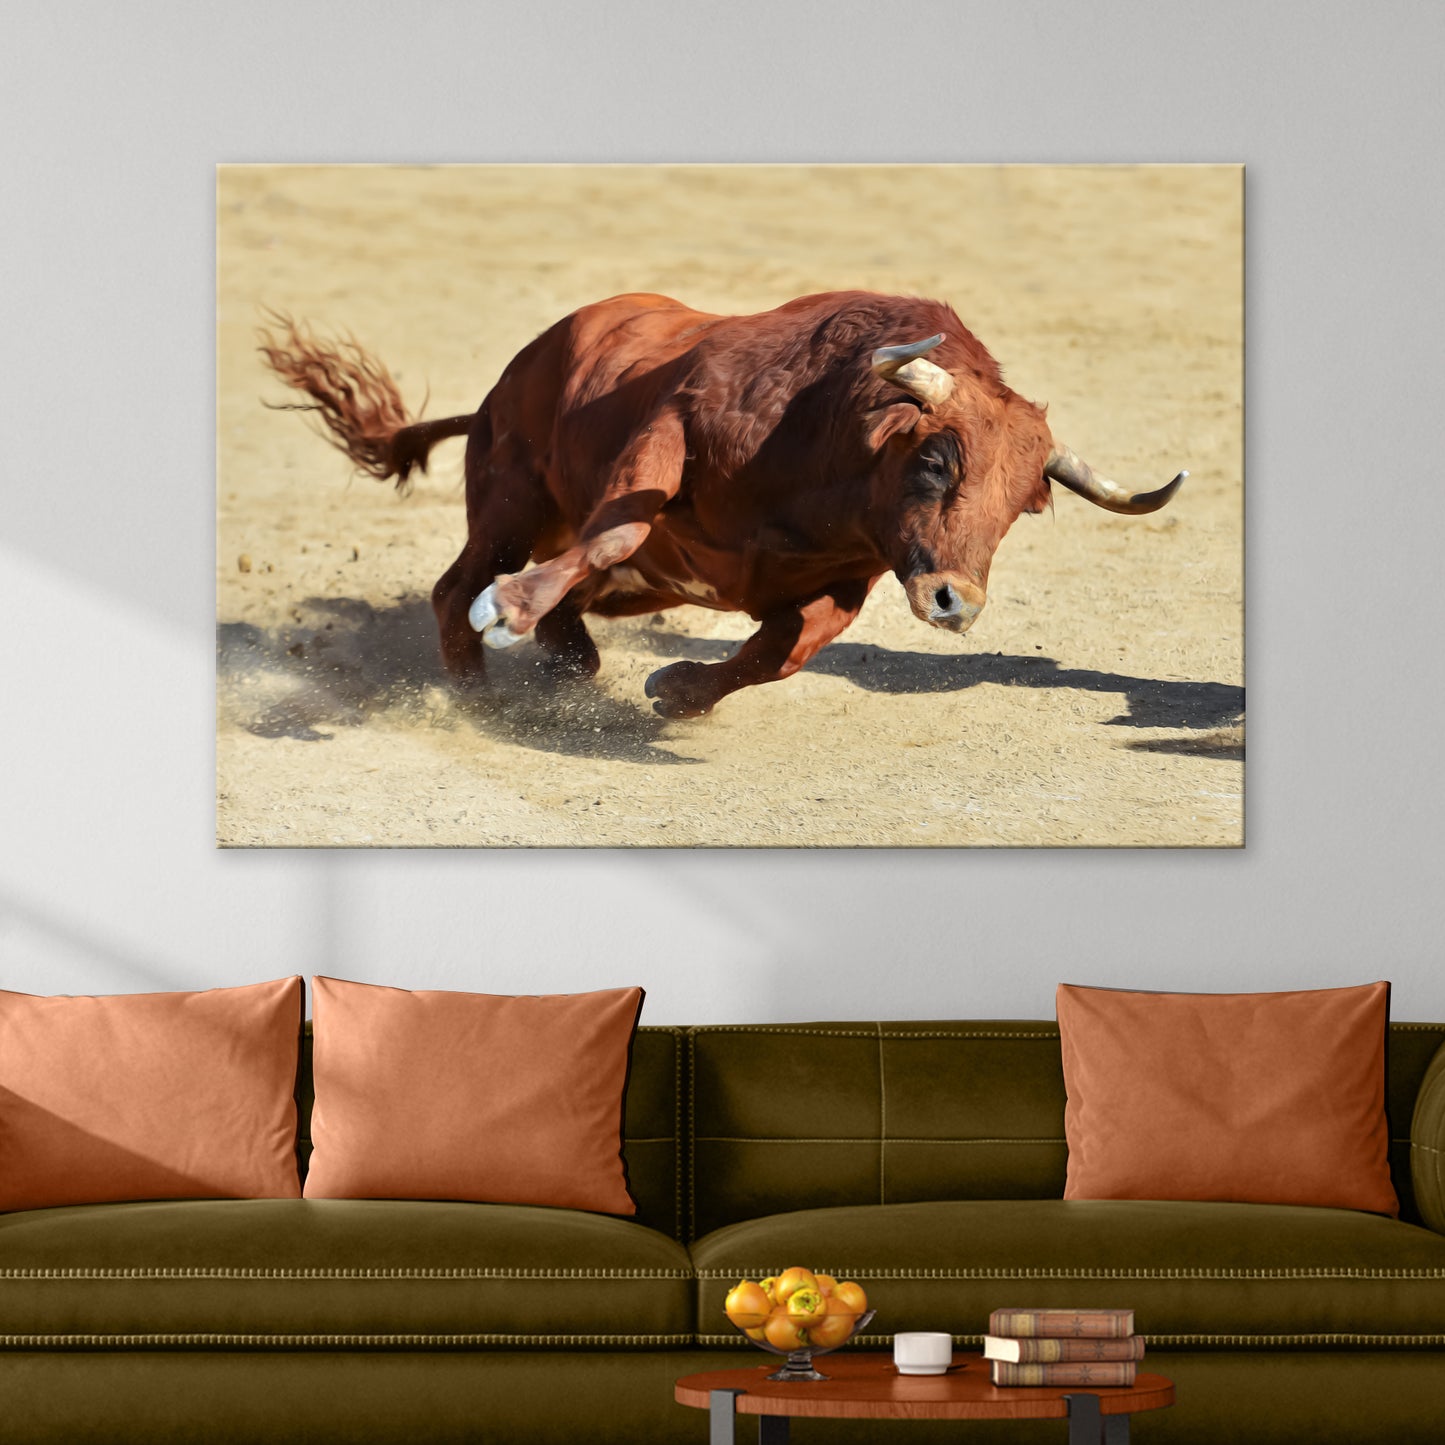 Running Wild Bull Canvas Wall Art - Image by Tailored Canvases